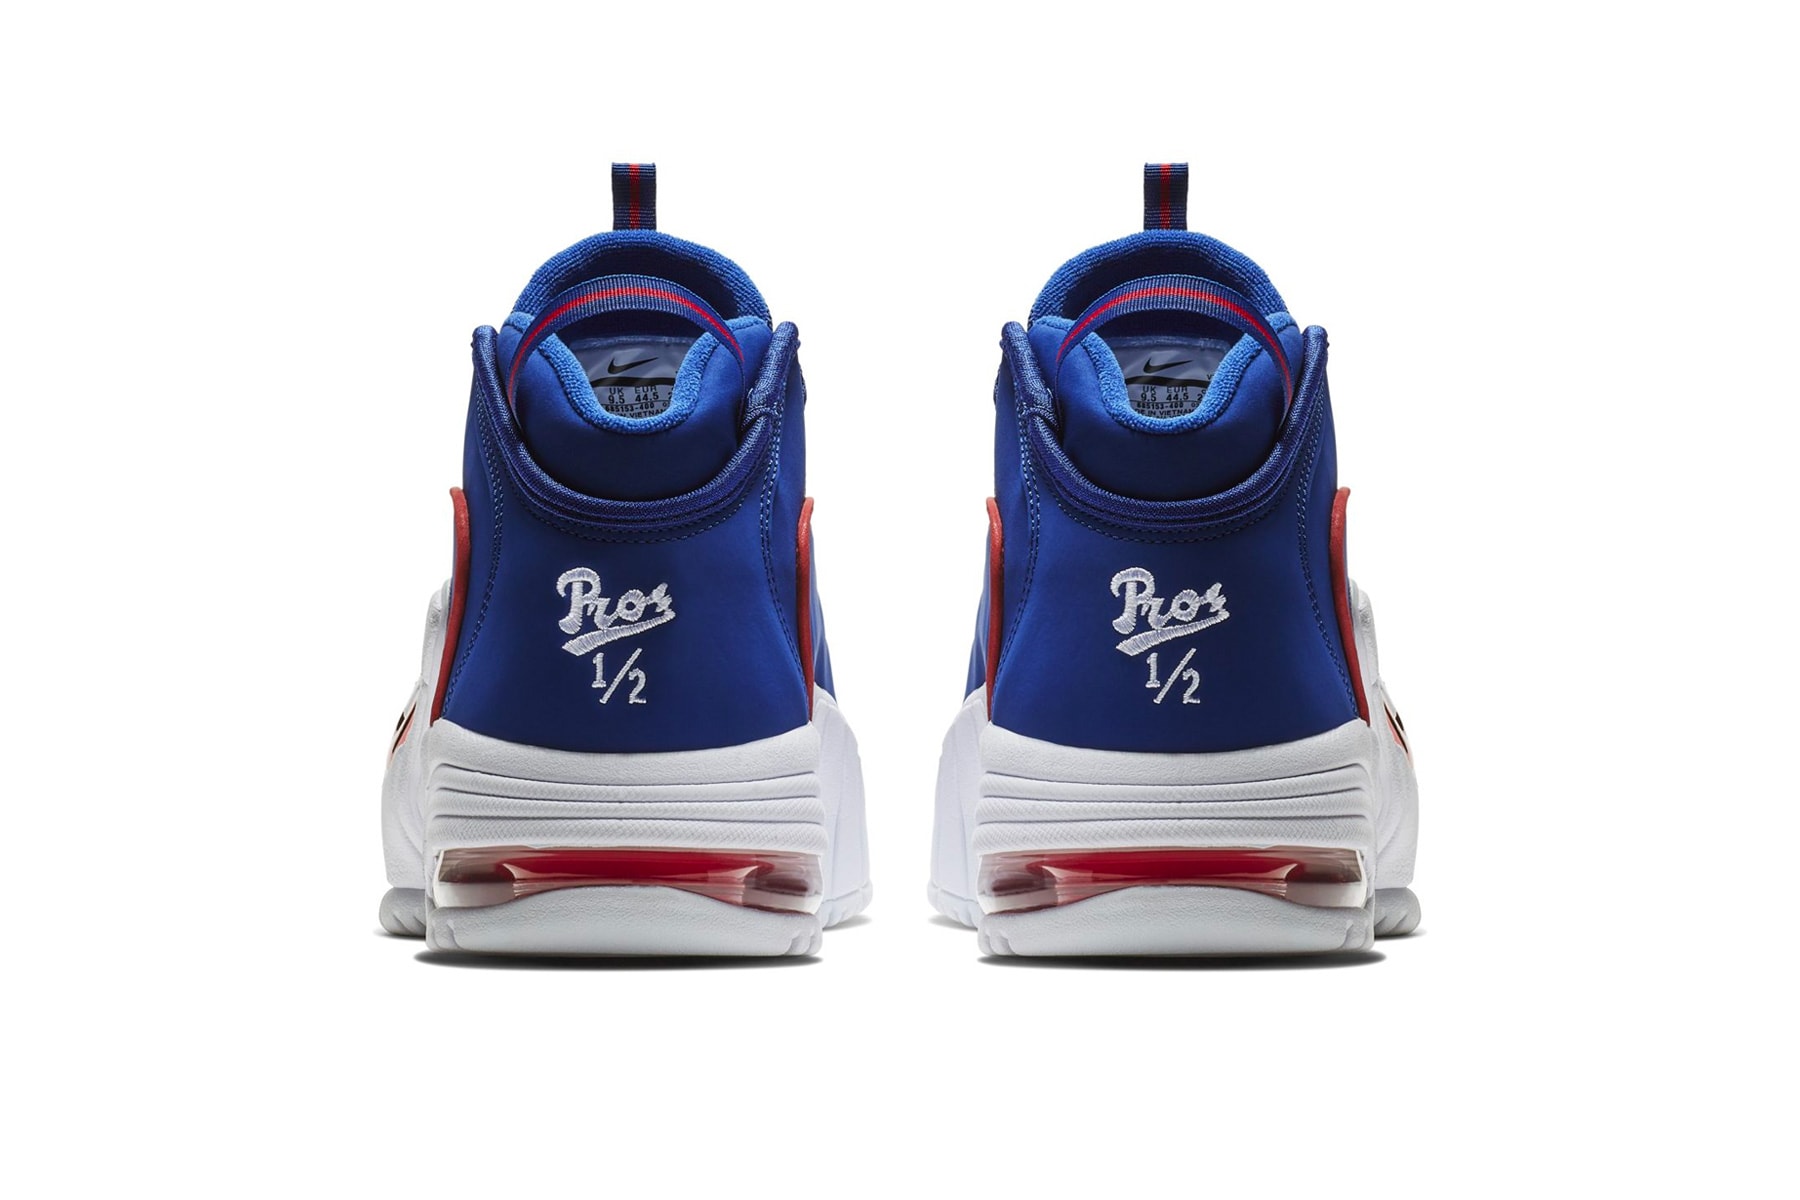 Nike Air Max Penny "Royal Blue/Gym Red" release date first look retro sneakers